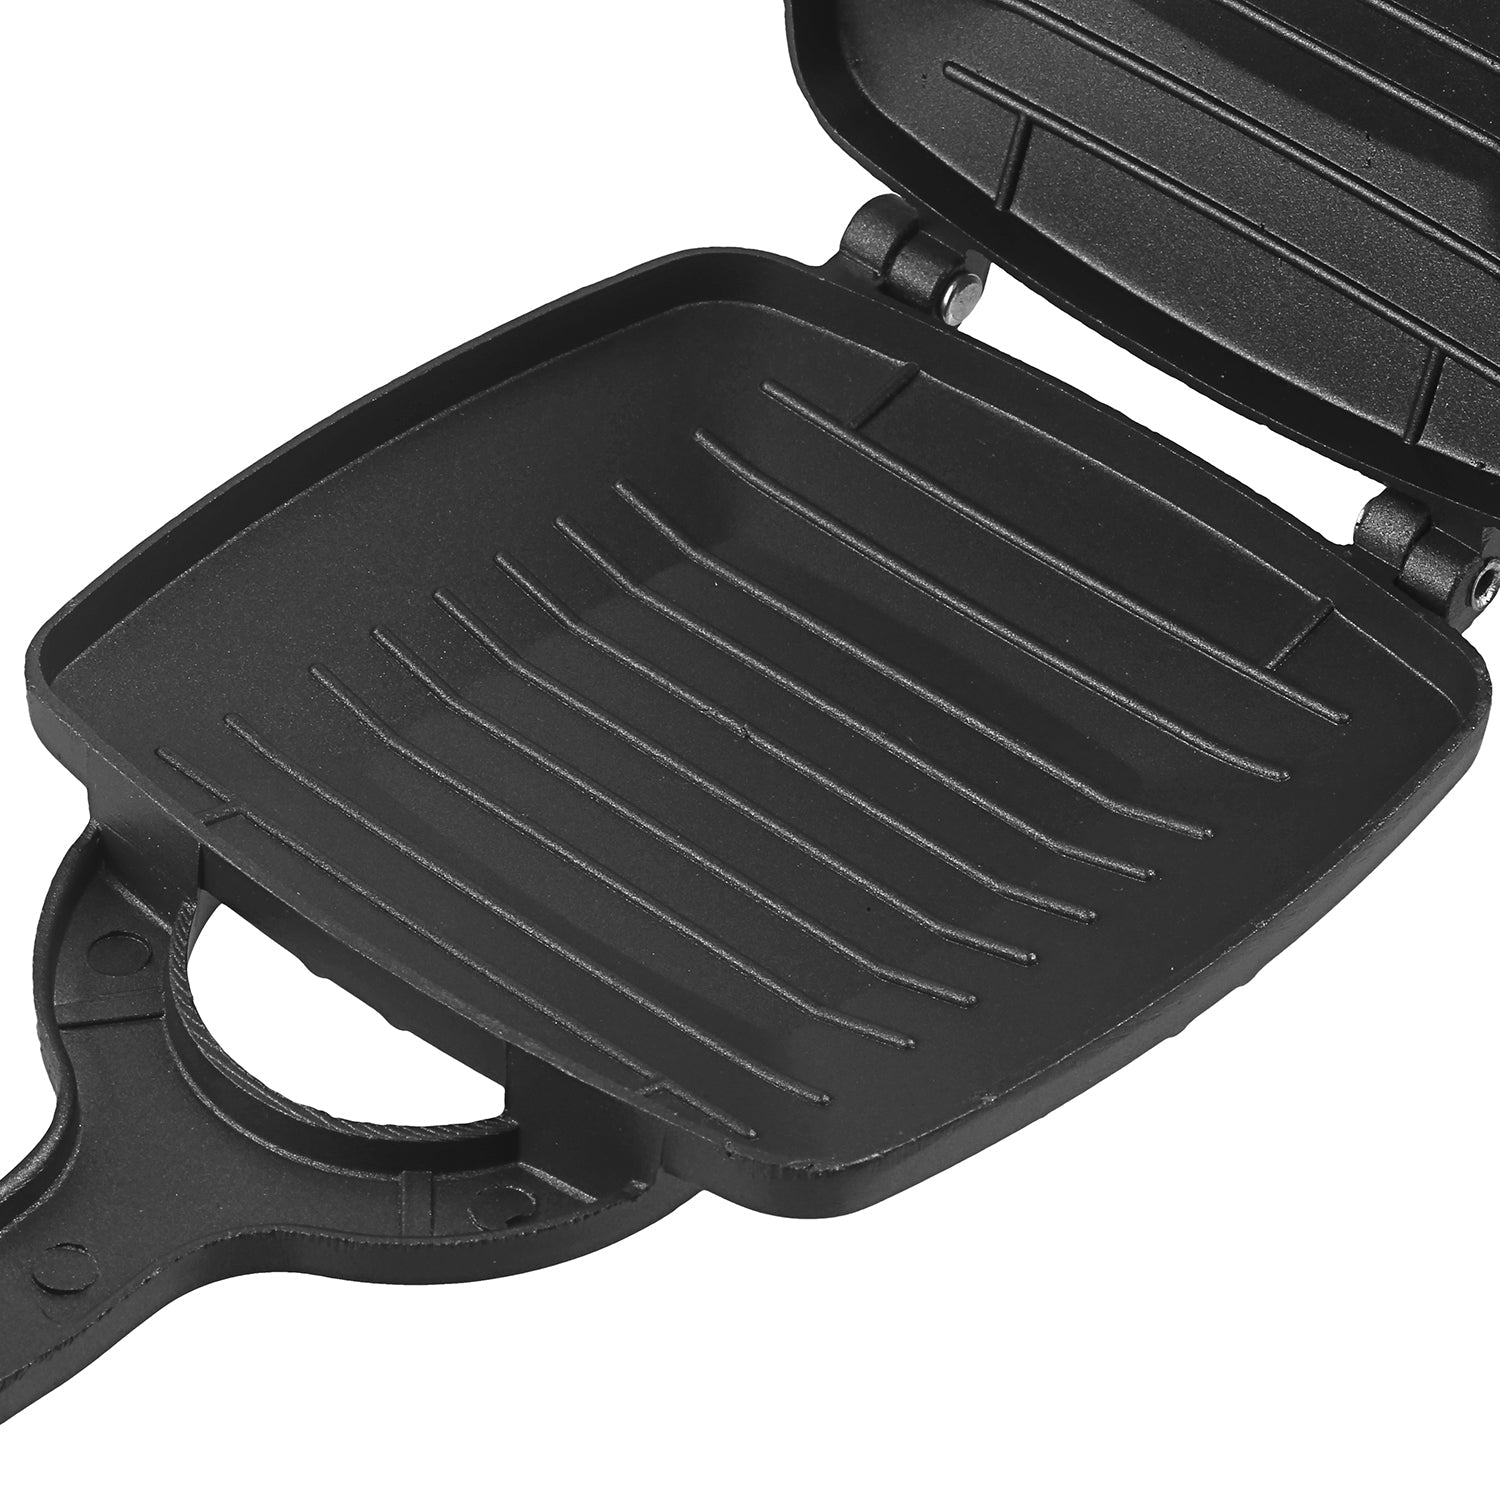 Gas Griller with Toxin Free Non Stick Coating